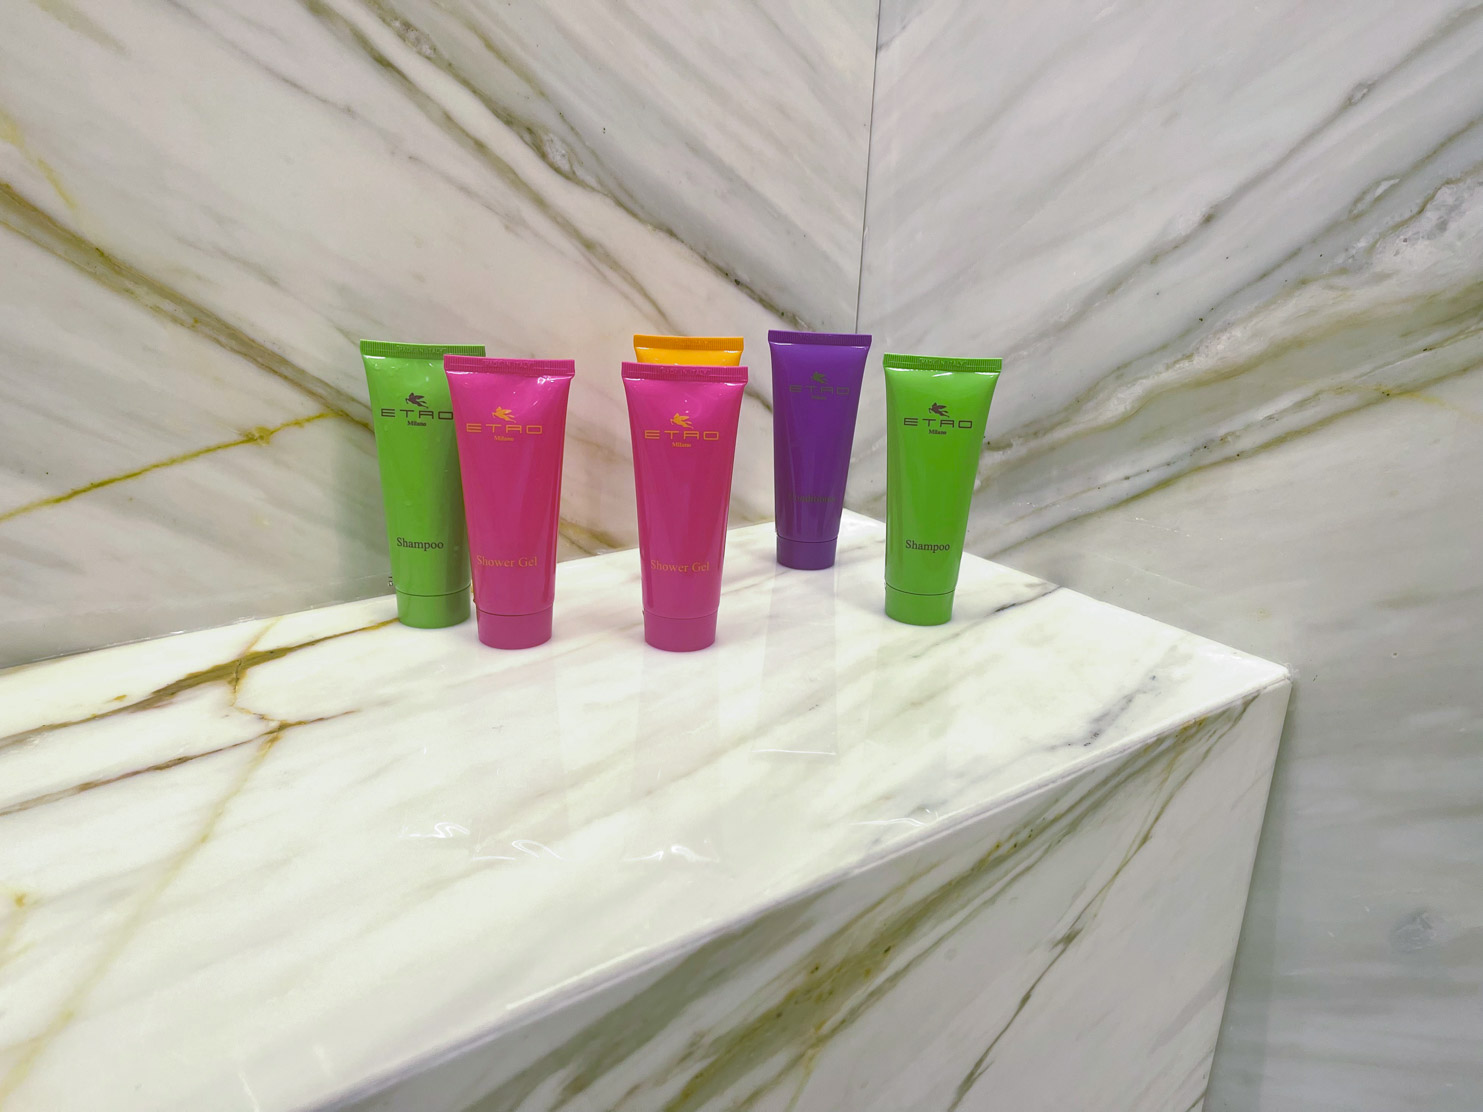 The First Musica Etro amenities— which smell and feel as delicious as they look. But, I would love to one day see them in full-size refillable bottles to help reduce plastic waste